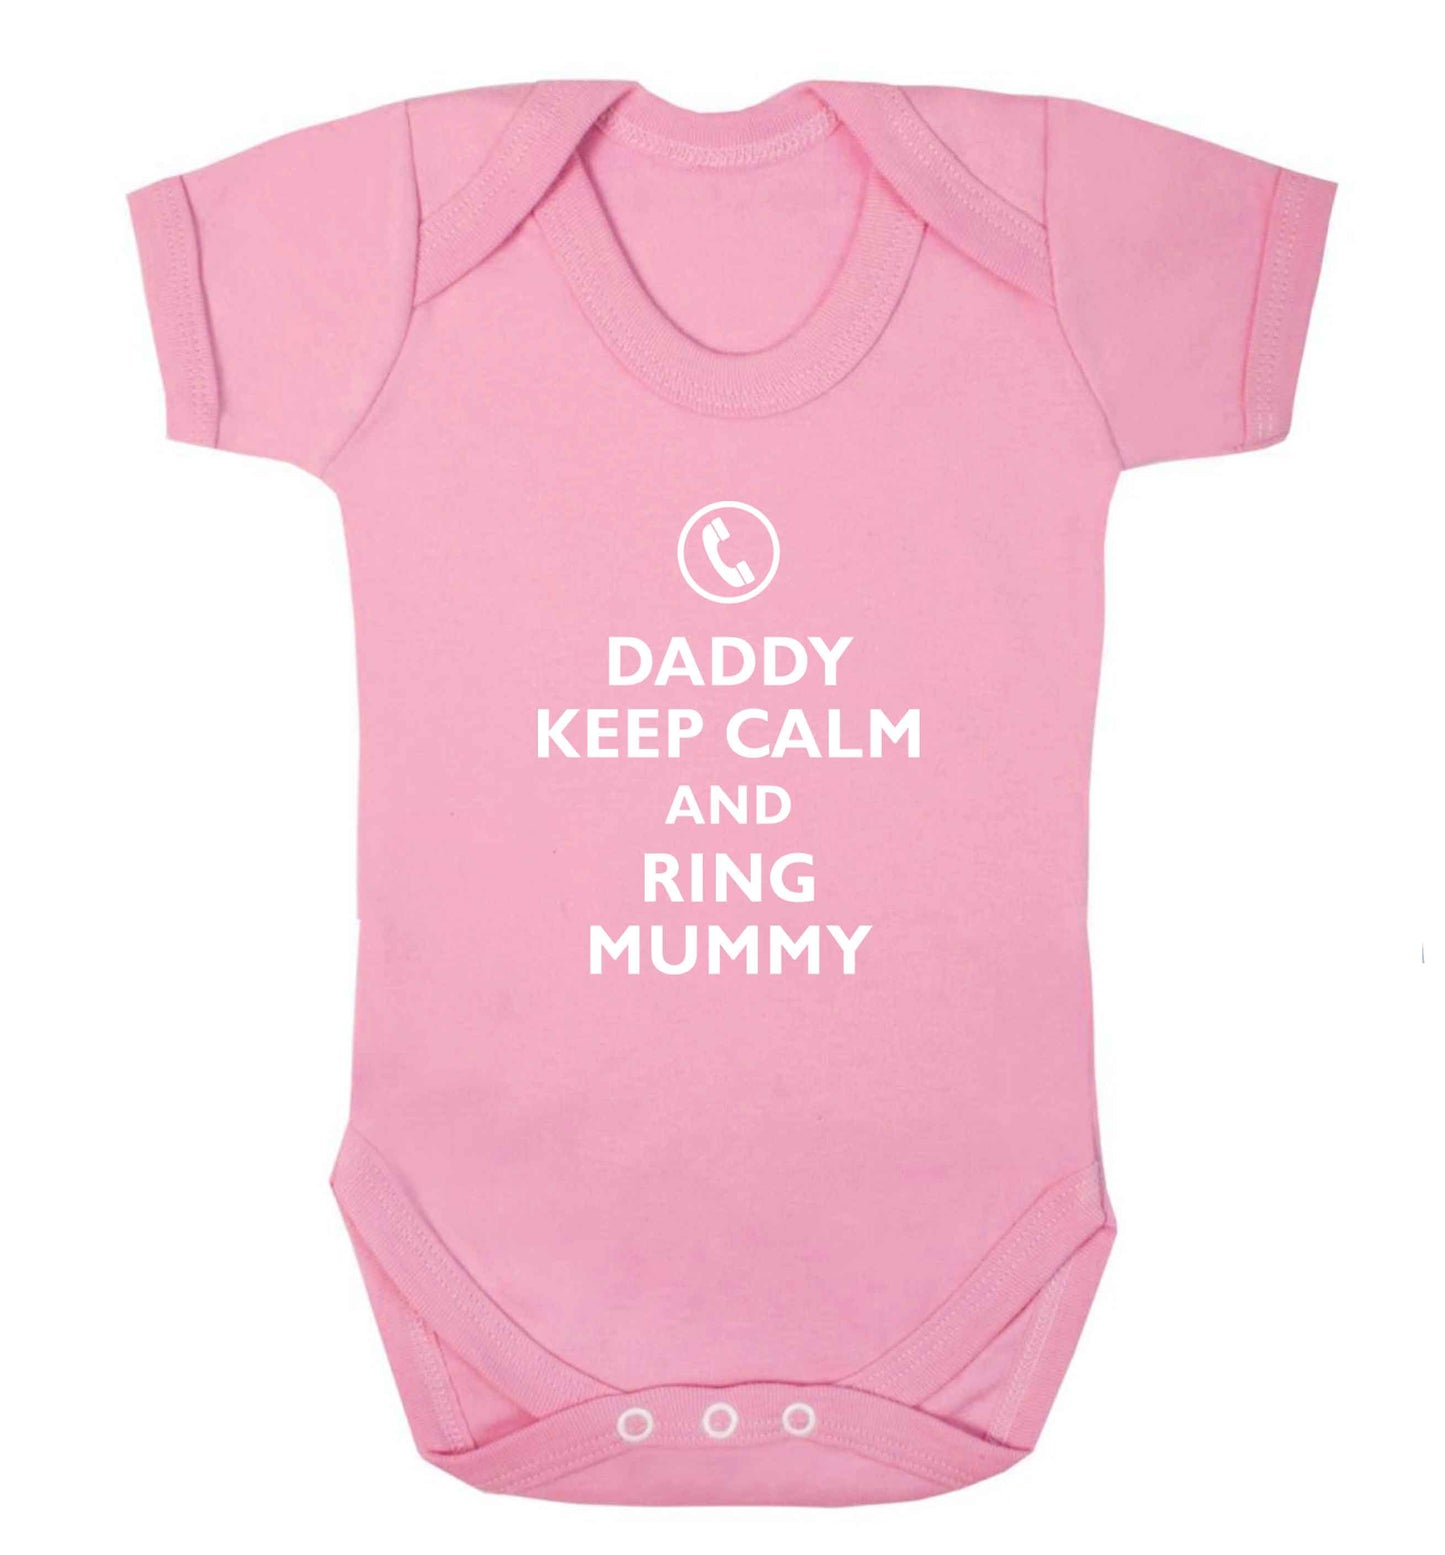 Daddy keep calm and ring mummy baby vest pale pink 18-24 months